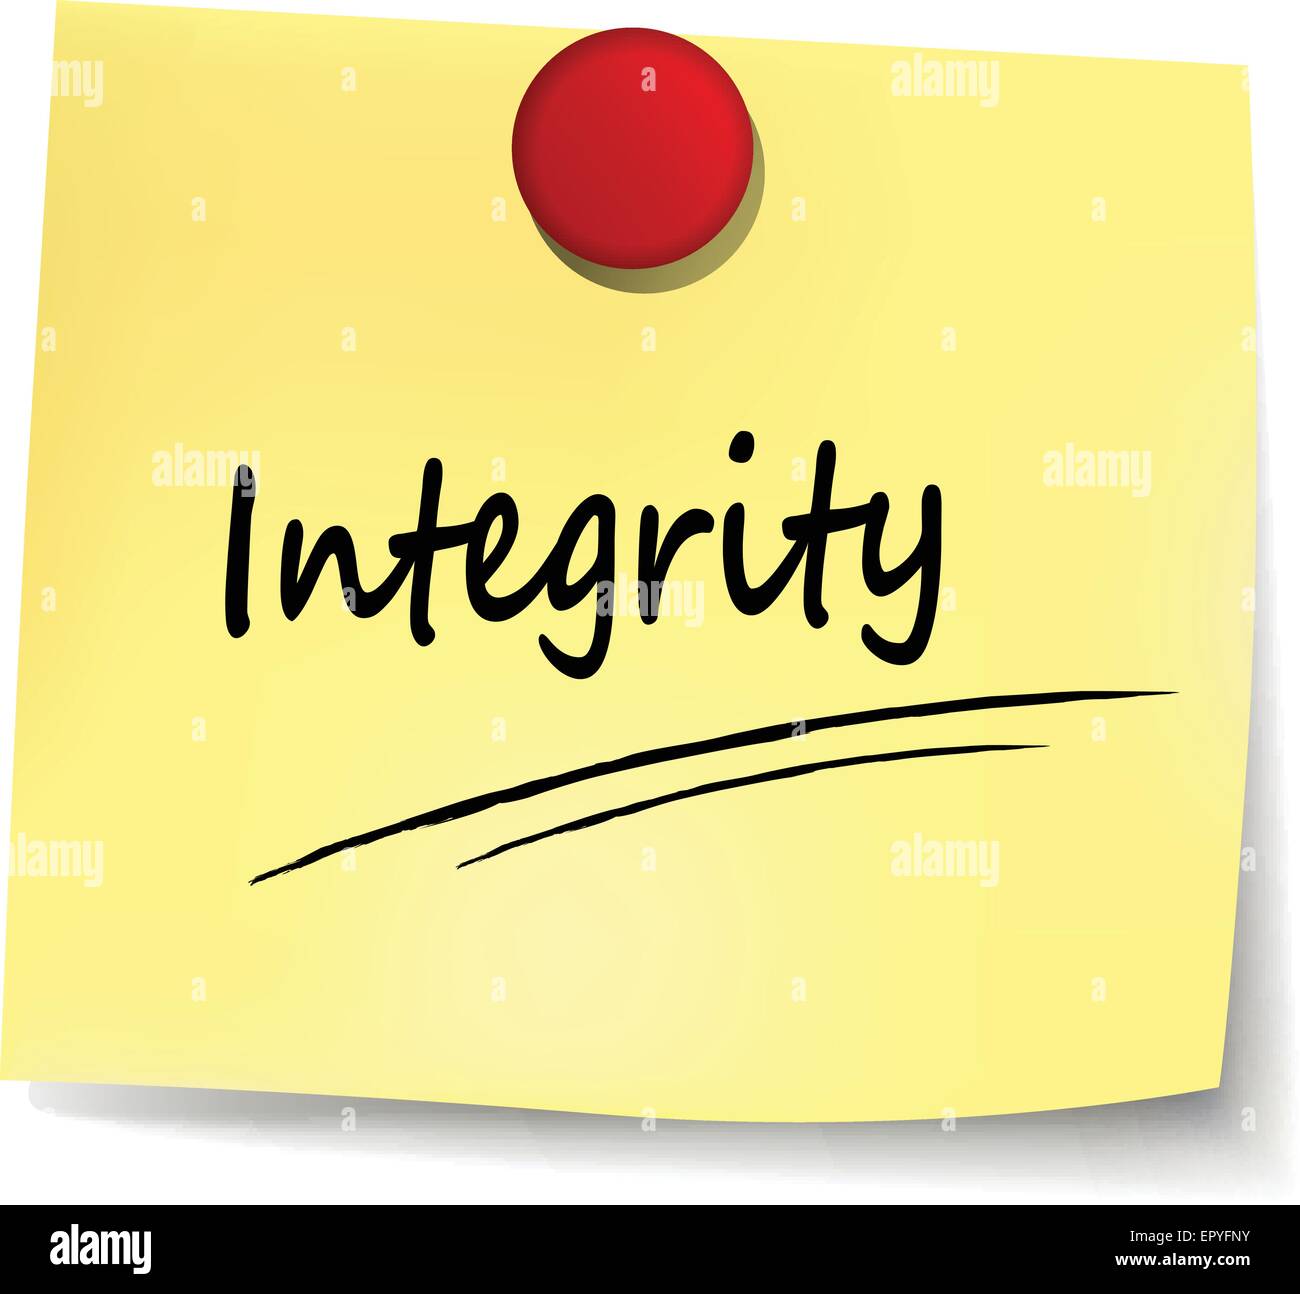 illustration of integrity yellow paper design note Stock Vector